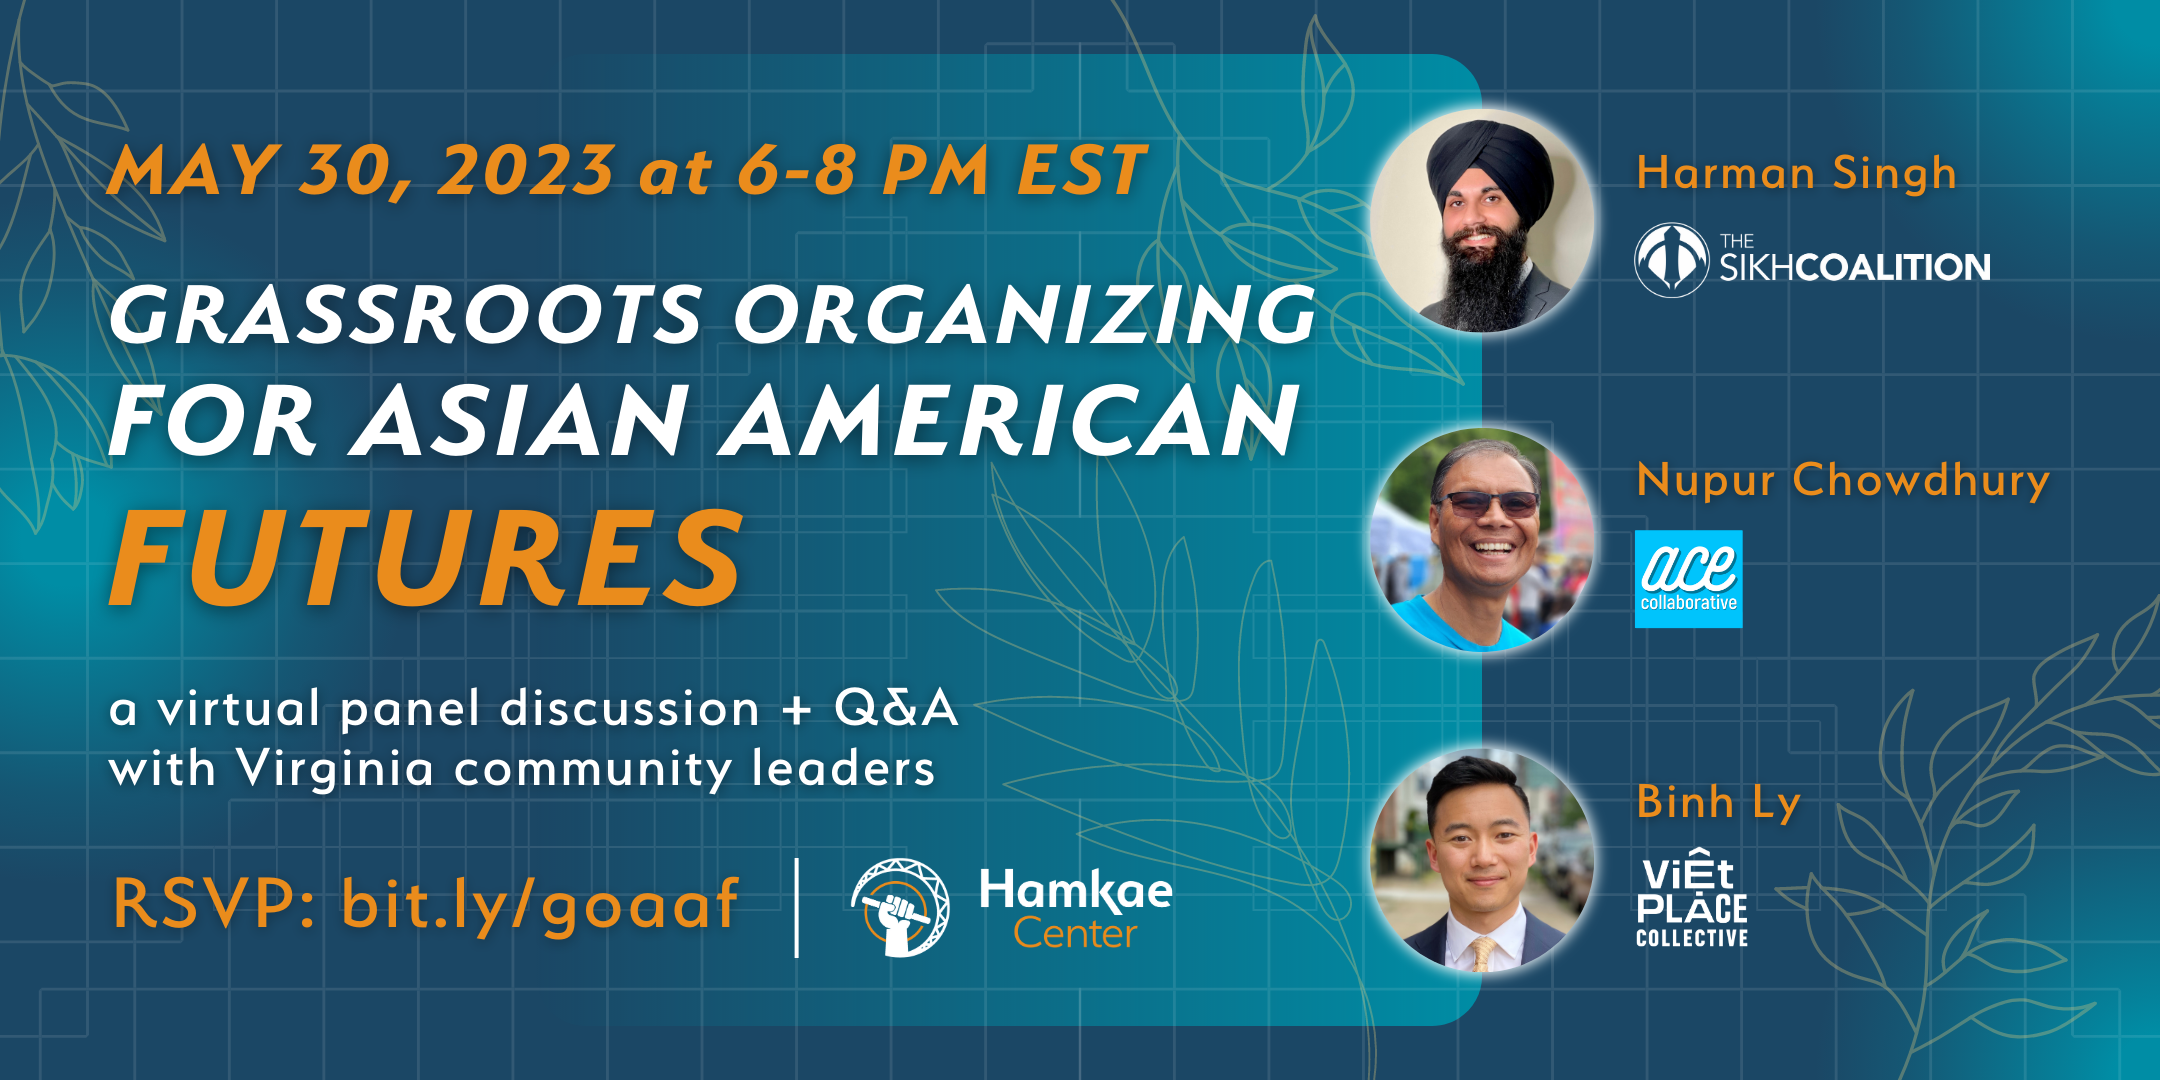 rassroots Organizing for Asian American Futures A virtual panel discussion + Q&A with Virginia community leaders: - Harman Singh (Sikh Coalition) - Nupur Chowdhury (ACE Collaborative) - Binh Ly (Viet Place Collective) Hosted by Hamkae Center May 30, 2023 at 6-8 PM EST